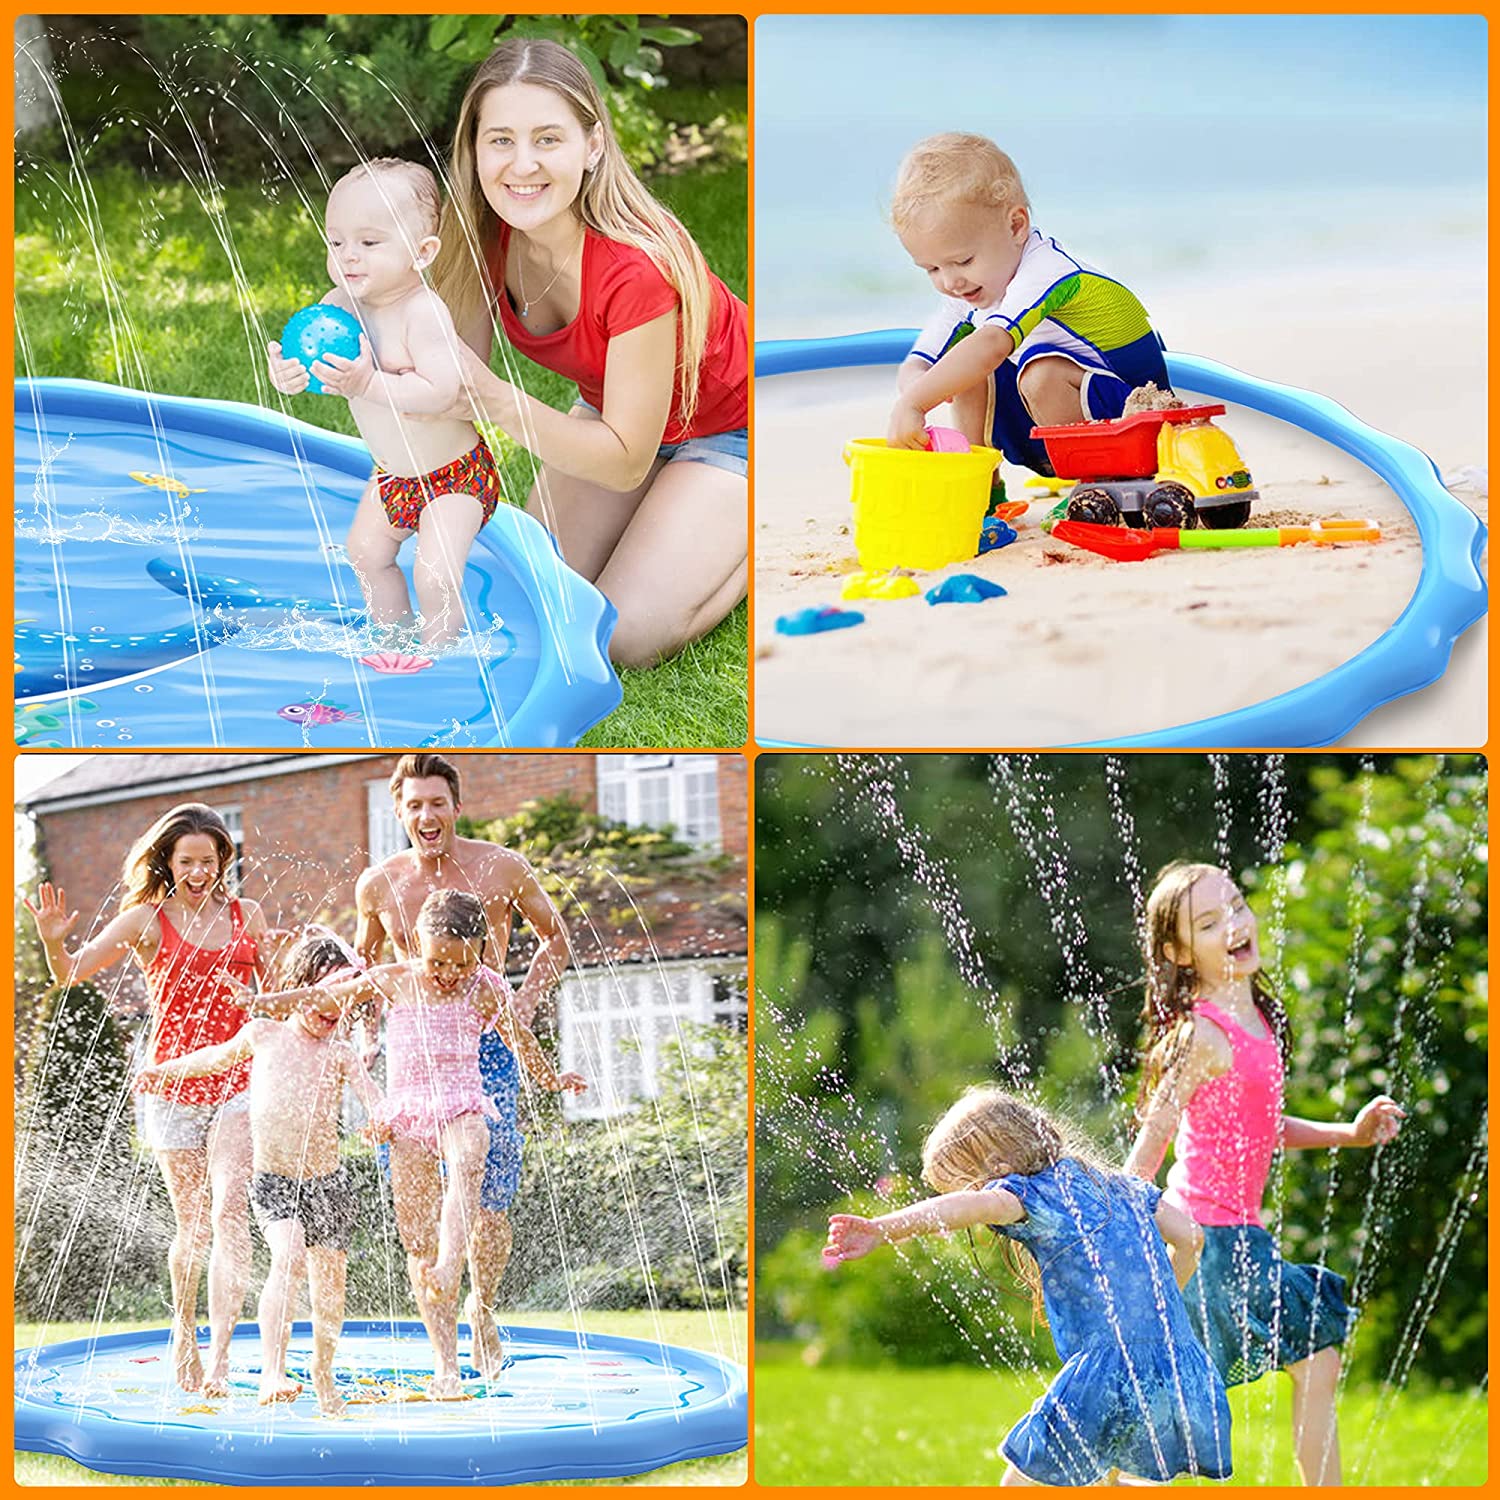 Meromore 68" Splash Pad for Kids and Adults Outdoor Lawn Games Water Play Toy Mat, Blue - image 5 of 8